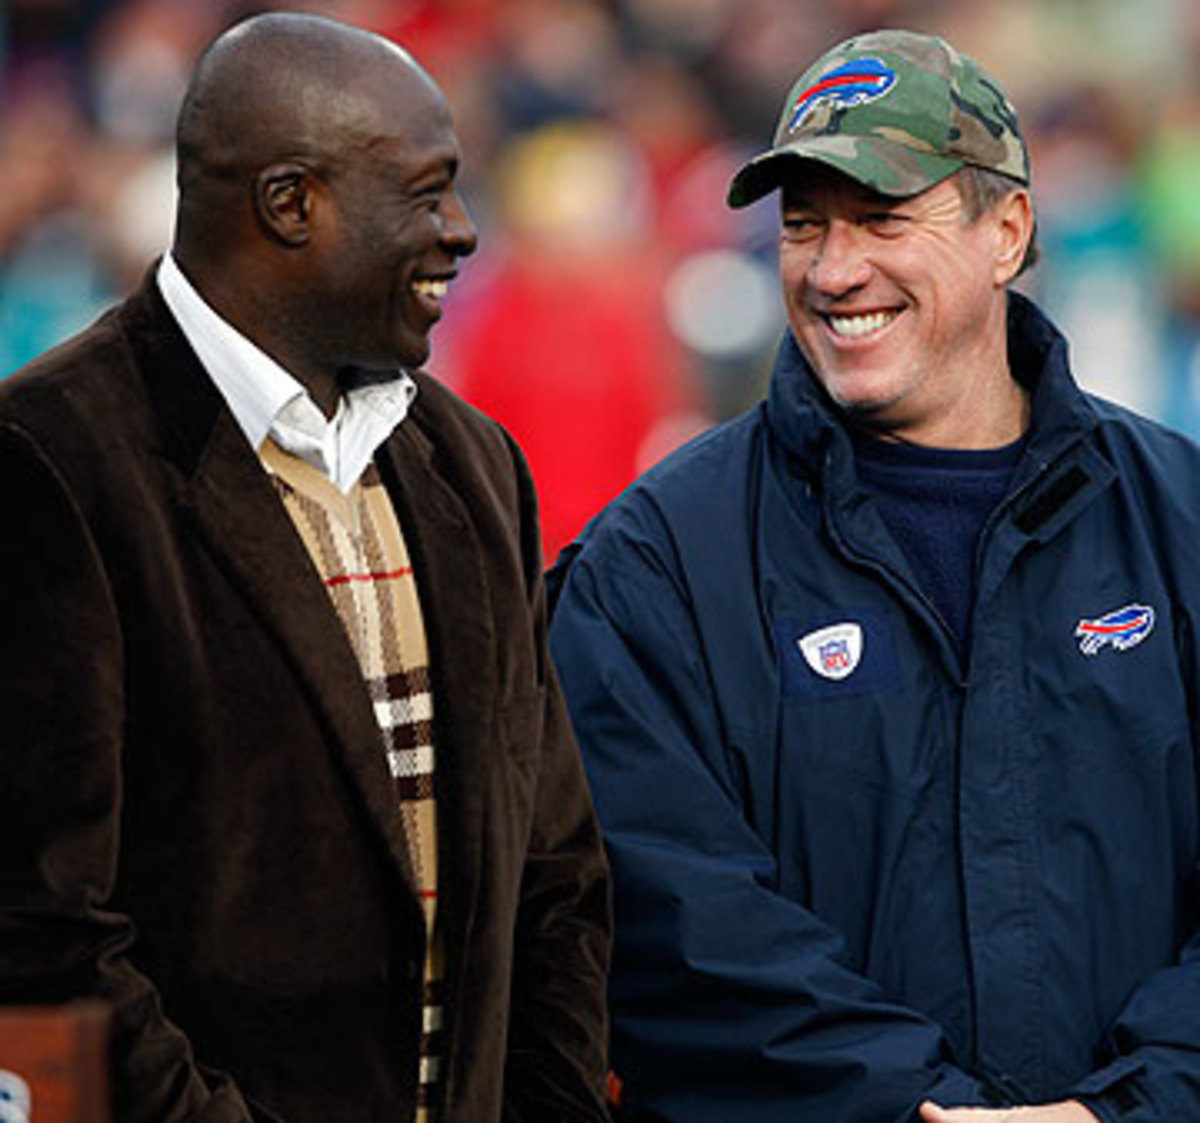 Bruce Smith and Jim Kelly in 2009 (Mike Groll/Getty Images)